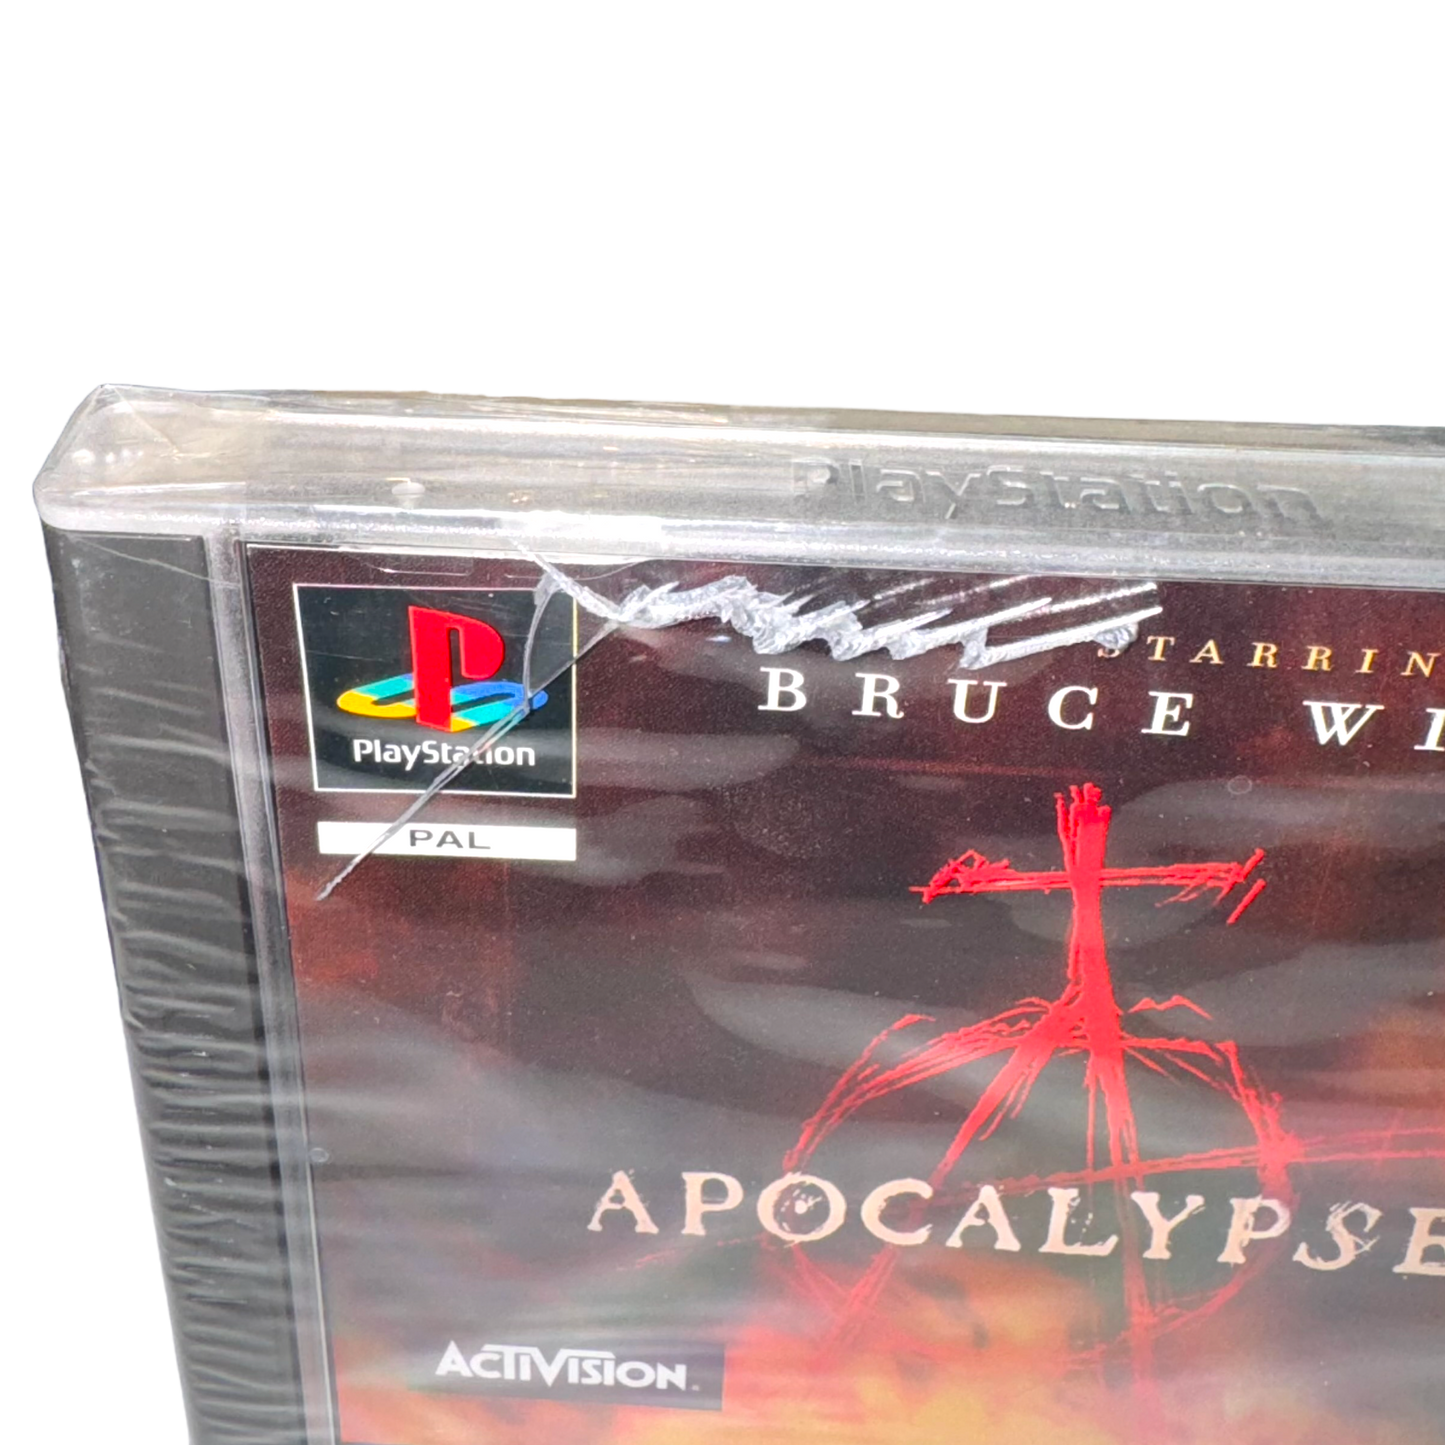 PS1 - Playstation 1 - Apocalypse Factory Sealed (PAL) Euro Release